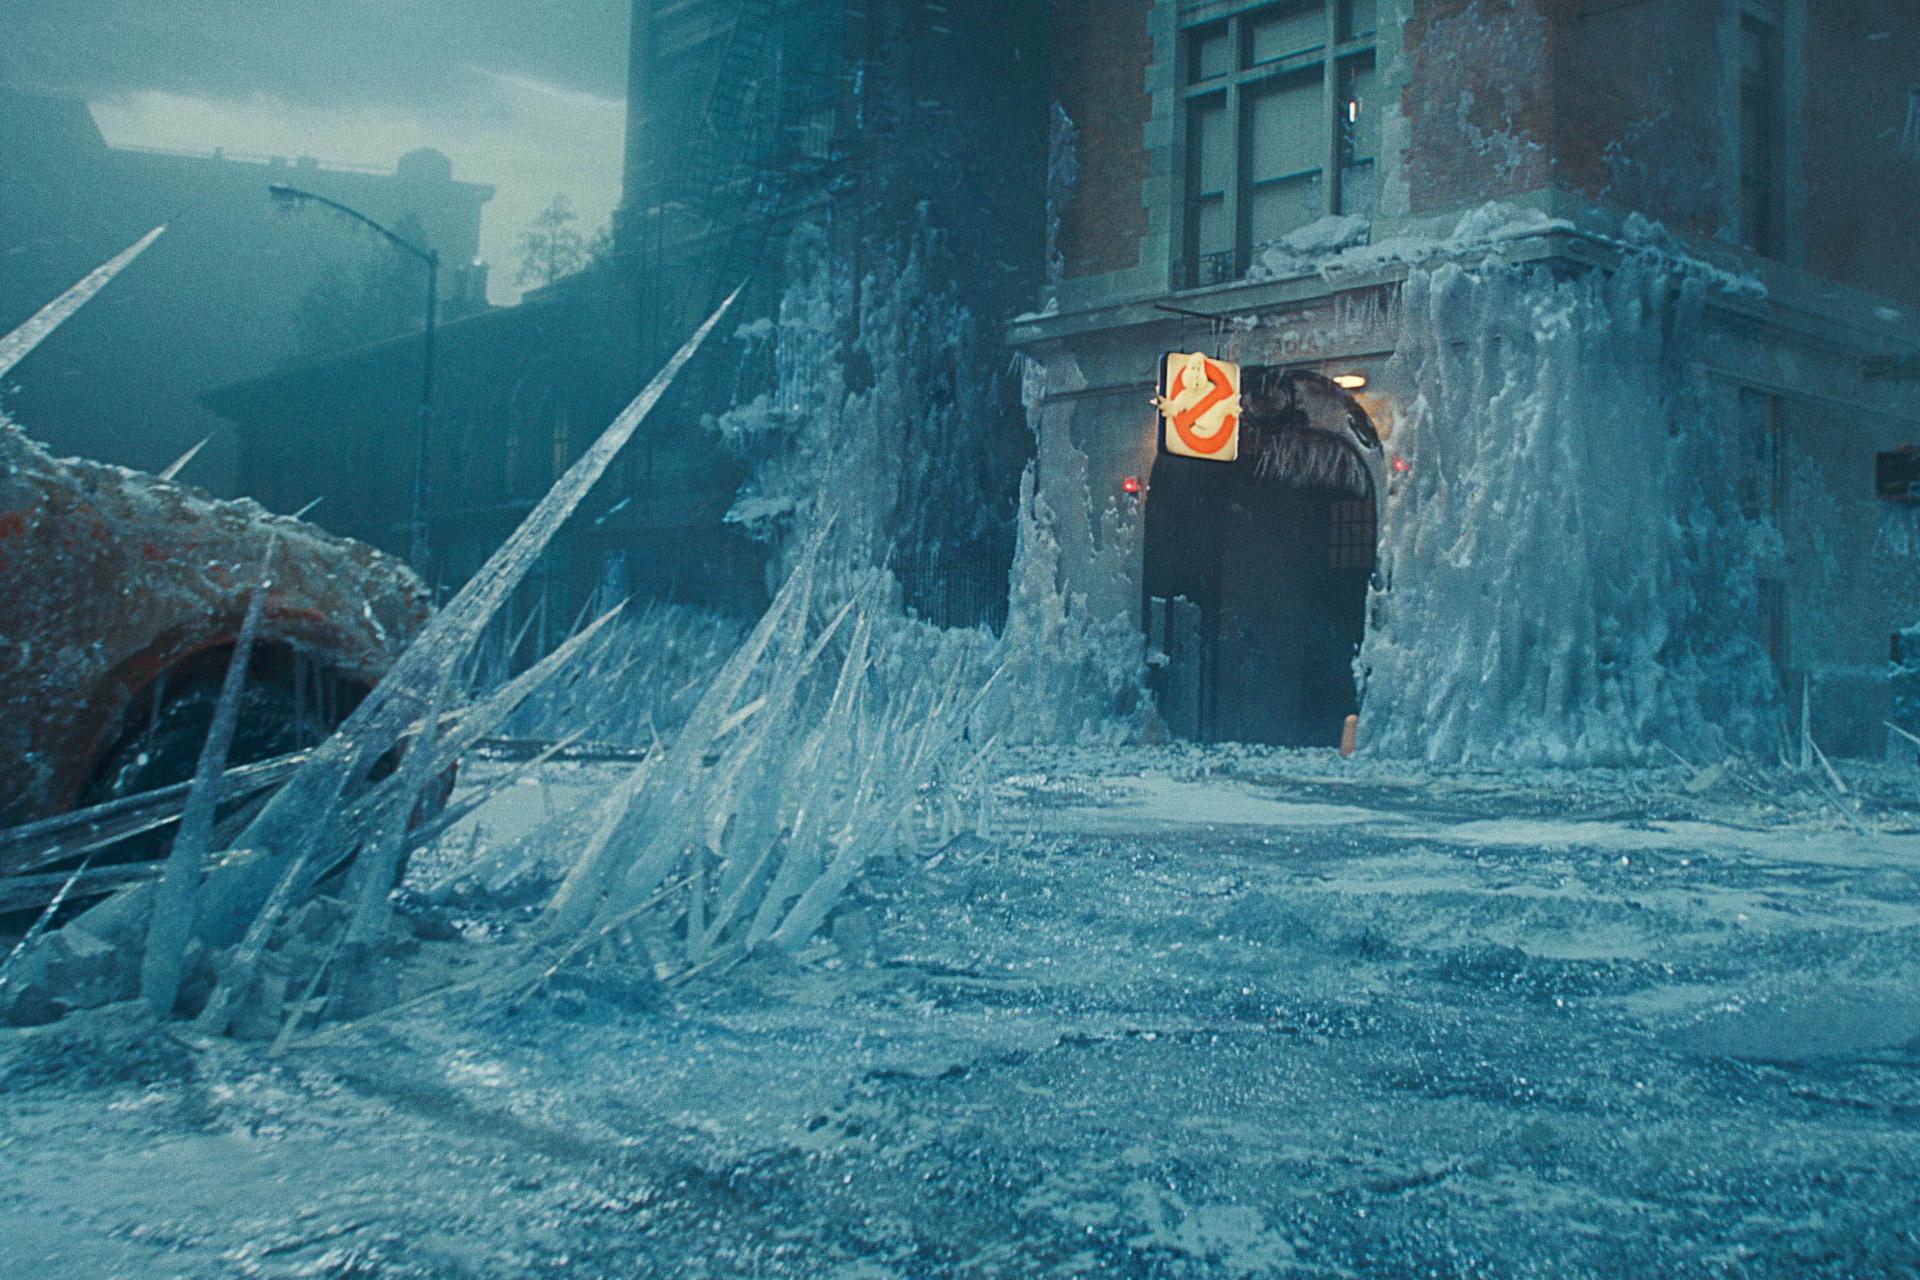 Illustration of Ghostbusters Firehouse covered in ice